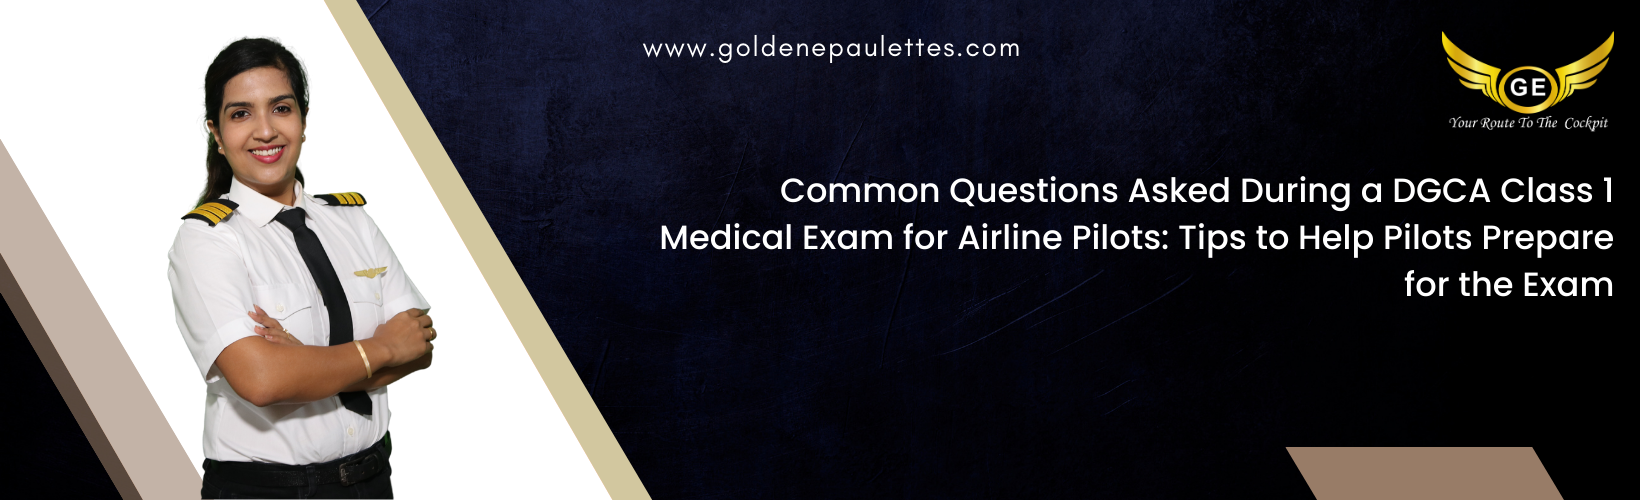 Common Questions Asked During a DGCA Class 1 Medical Exam for Airline Pilots